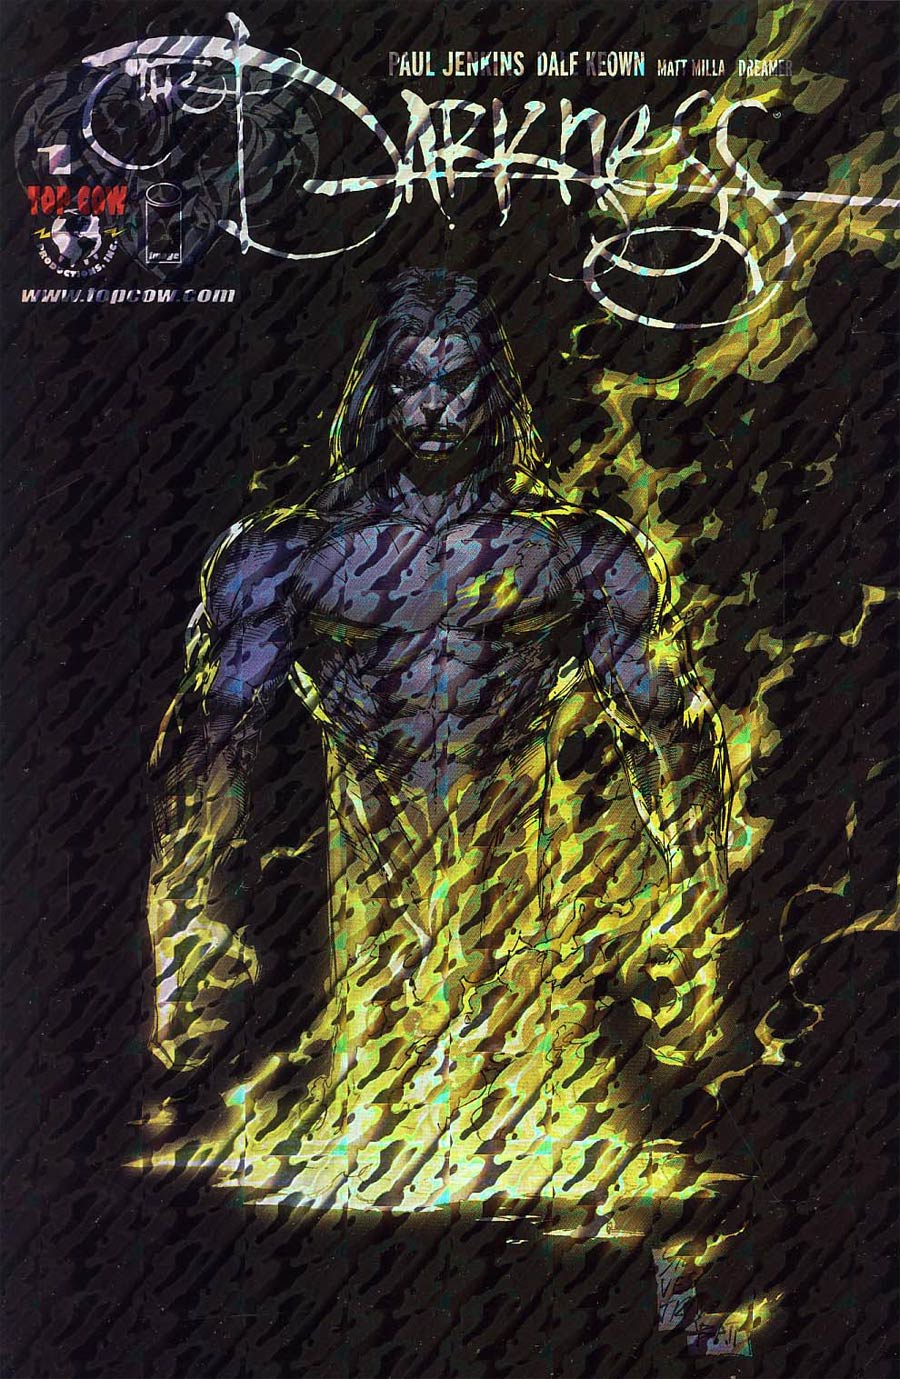 Darkness Vol 2 #1 Cover B Holofoil Edition